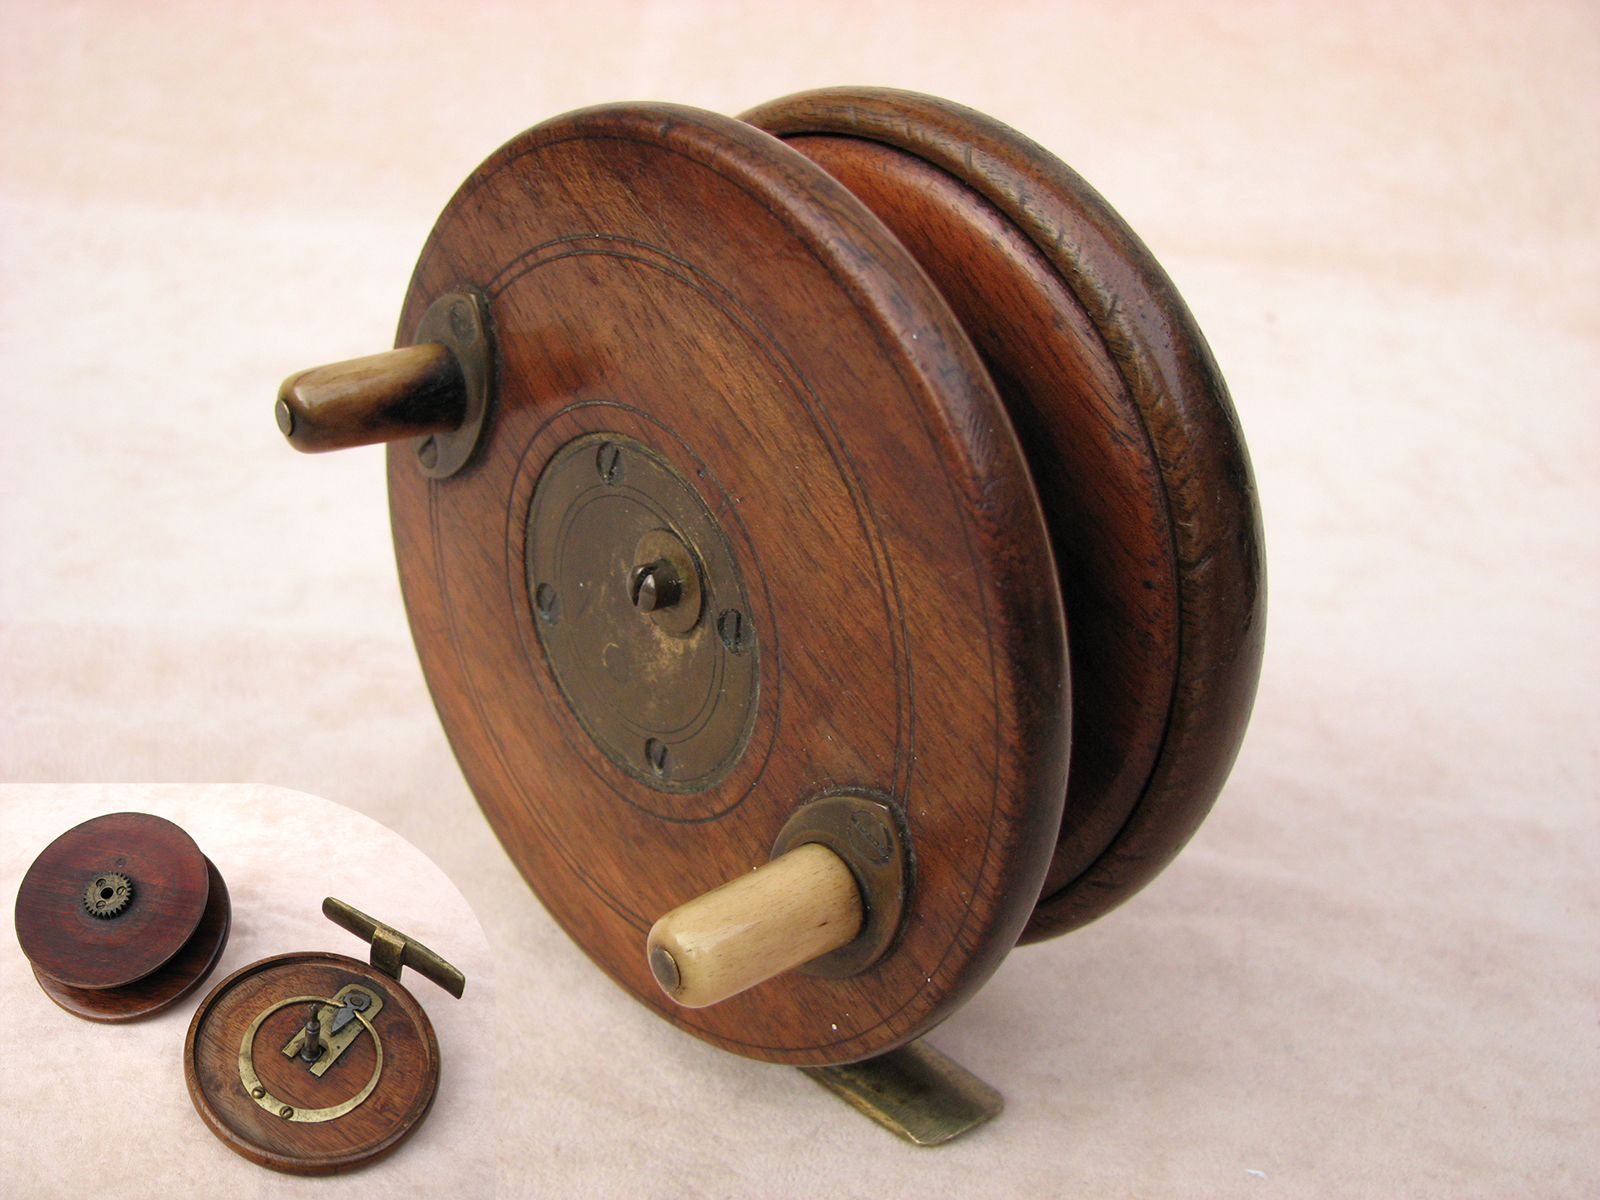 Early 20th century Slaters latch 4 inch centrepin starback reel